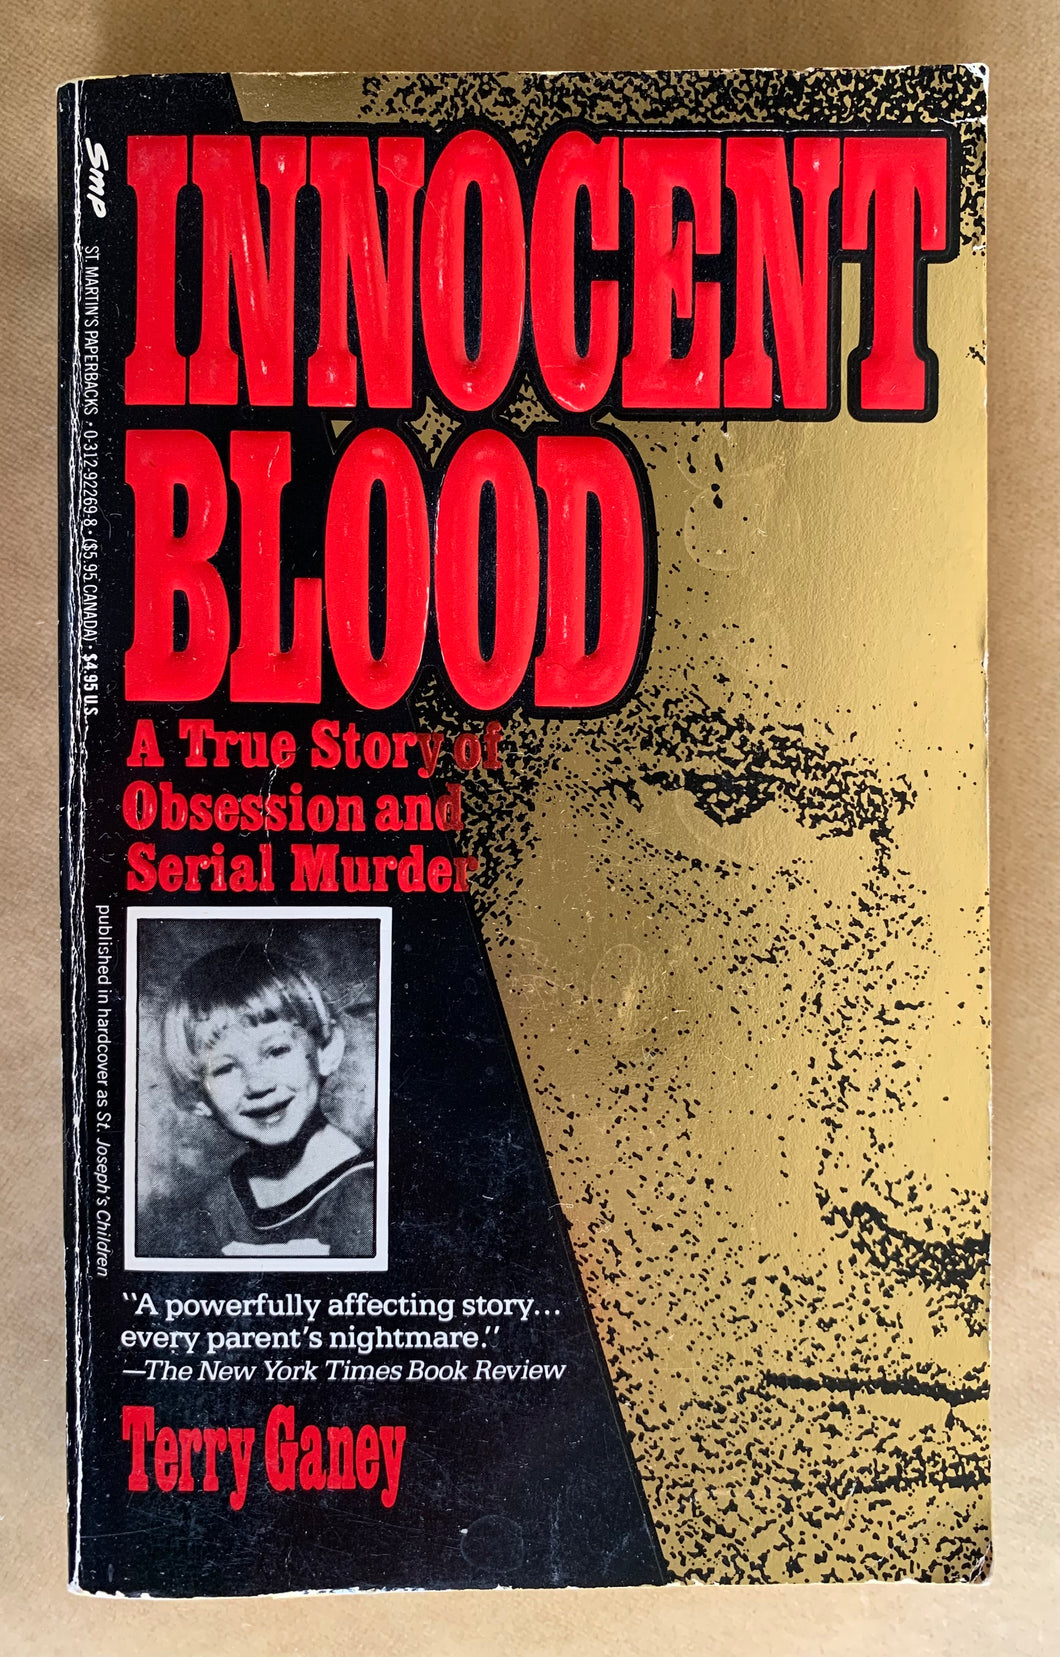 Innocent Blood: A True Story of Obsession and Serial Murder